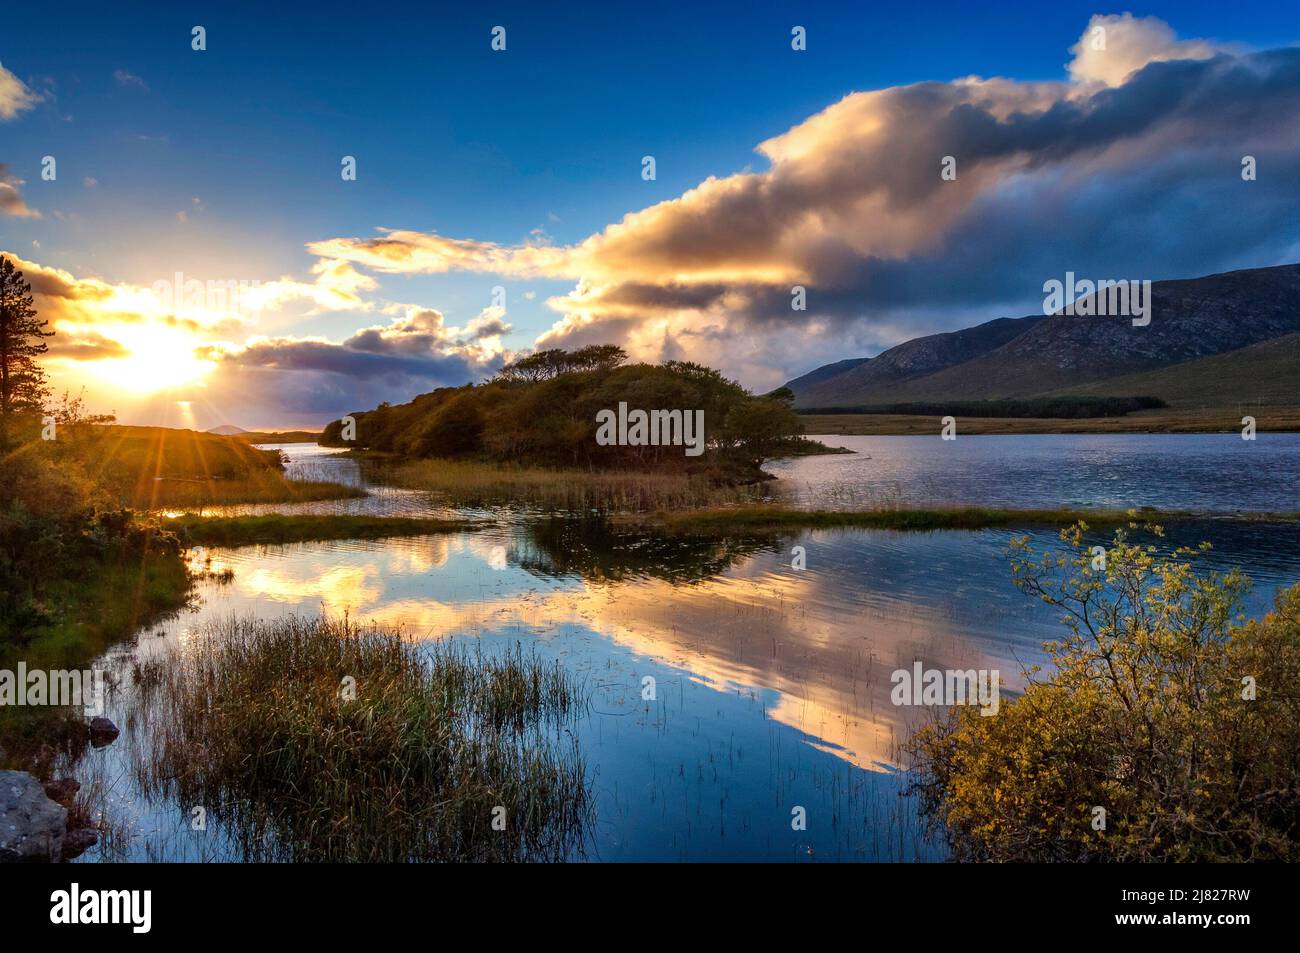 Sun setting over a lake in a mountain landscape, Derryclare Lake, Connemara, County Galway, Ireland Stock Photo